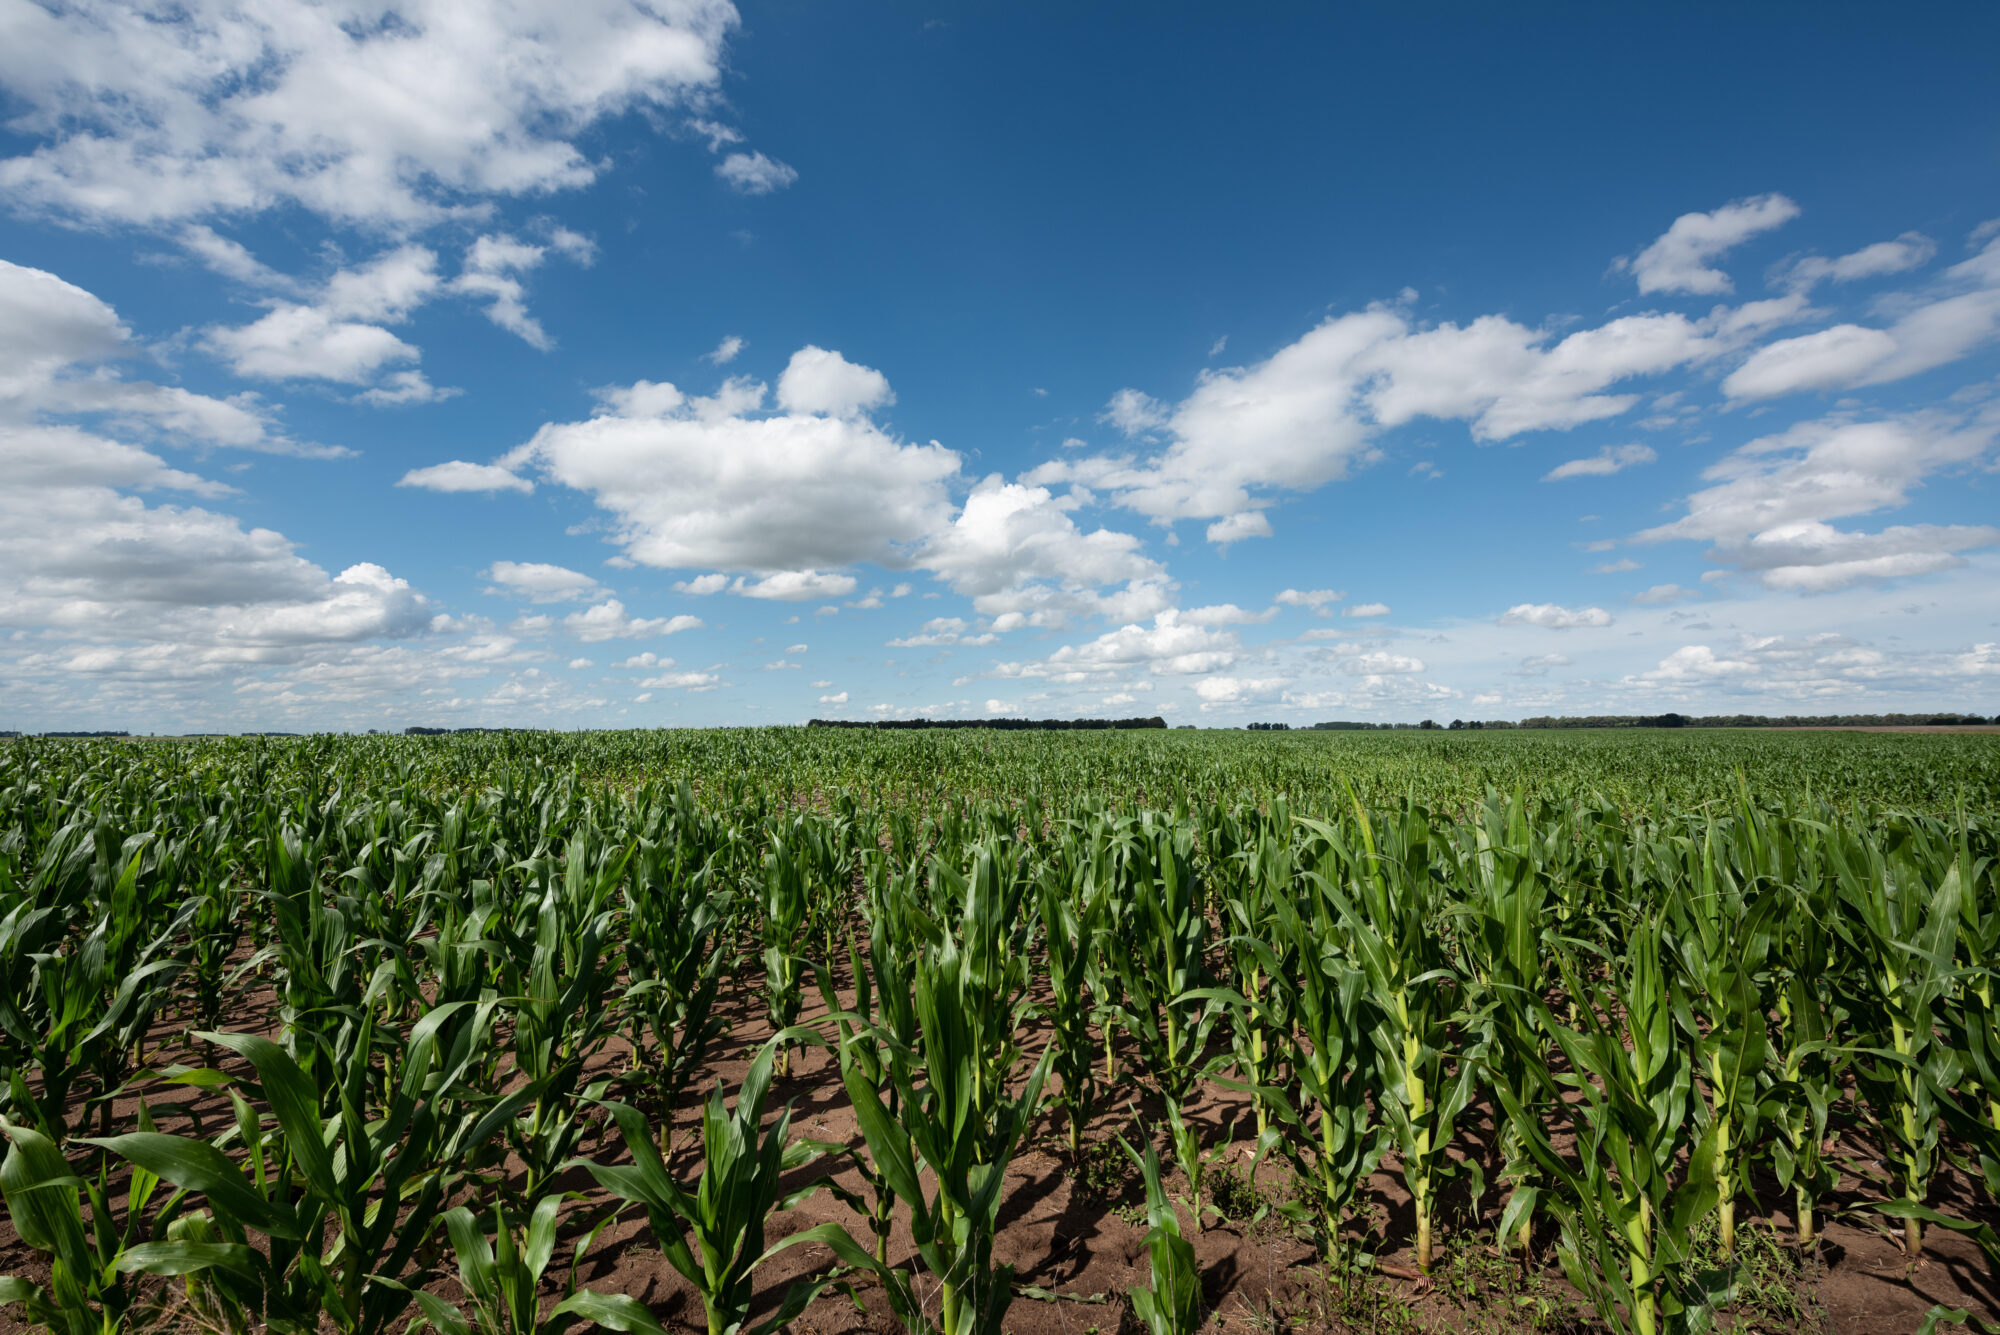 A maize plantation in the province of Buenos Aires, Argentina.